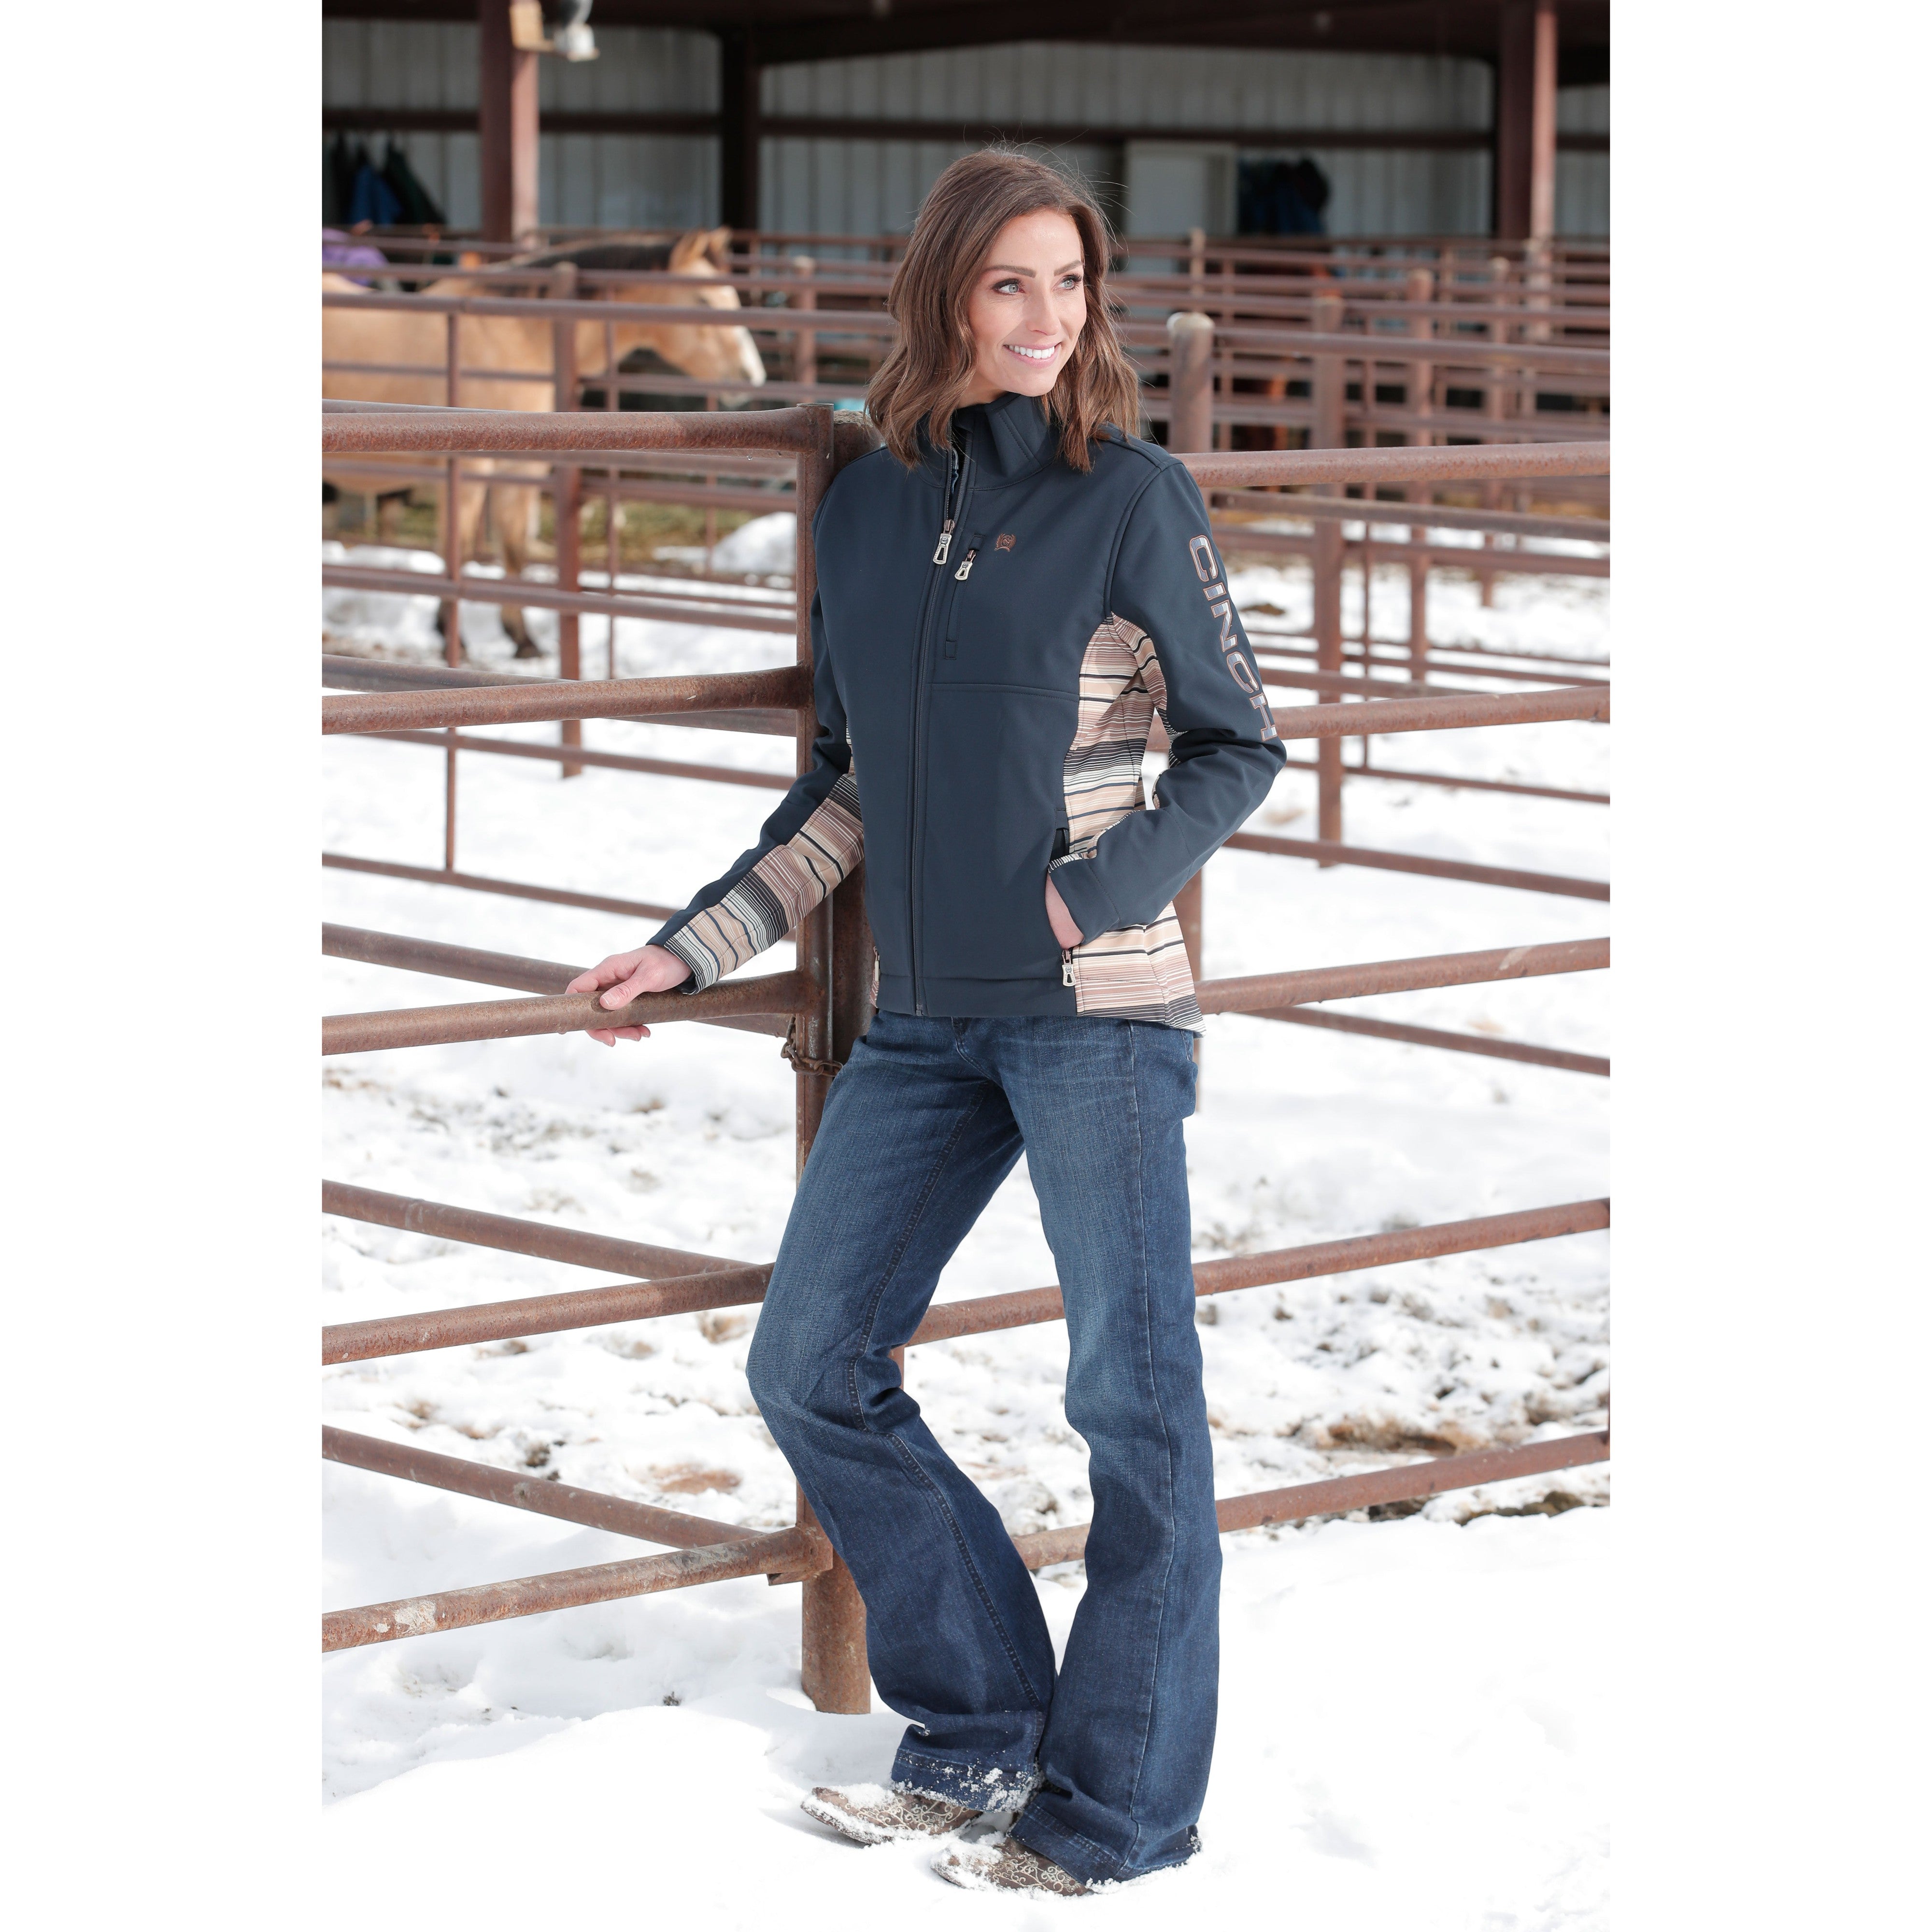 Cinch Jeans Women's Concealed Carry Bonded Jacket - Green